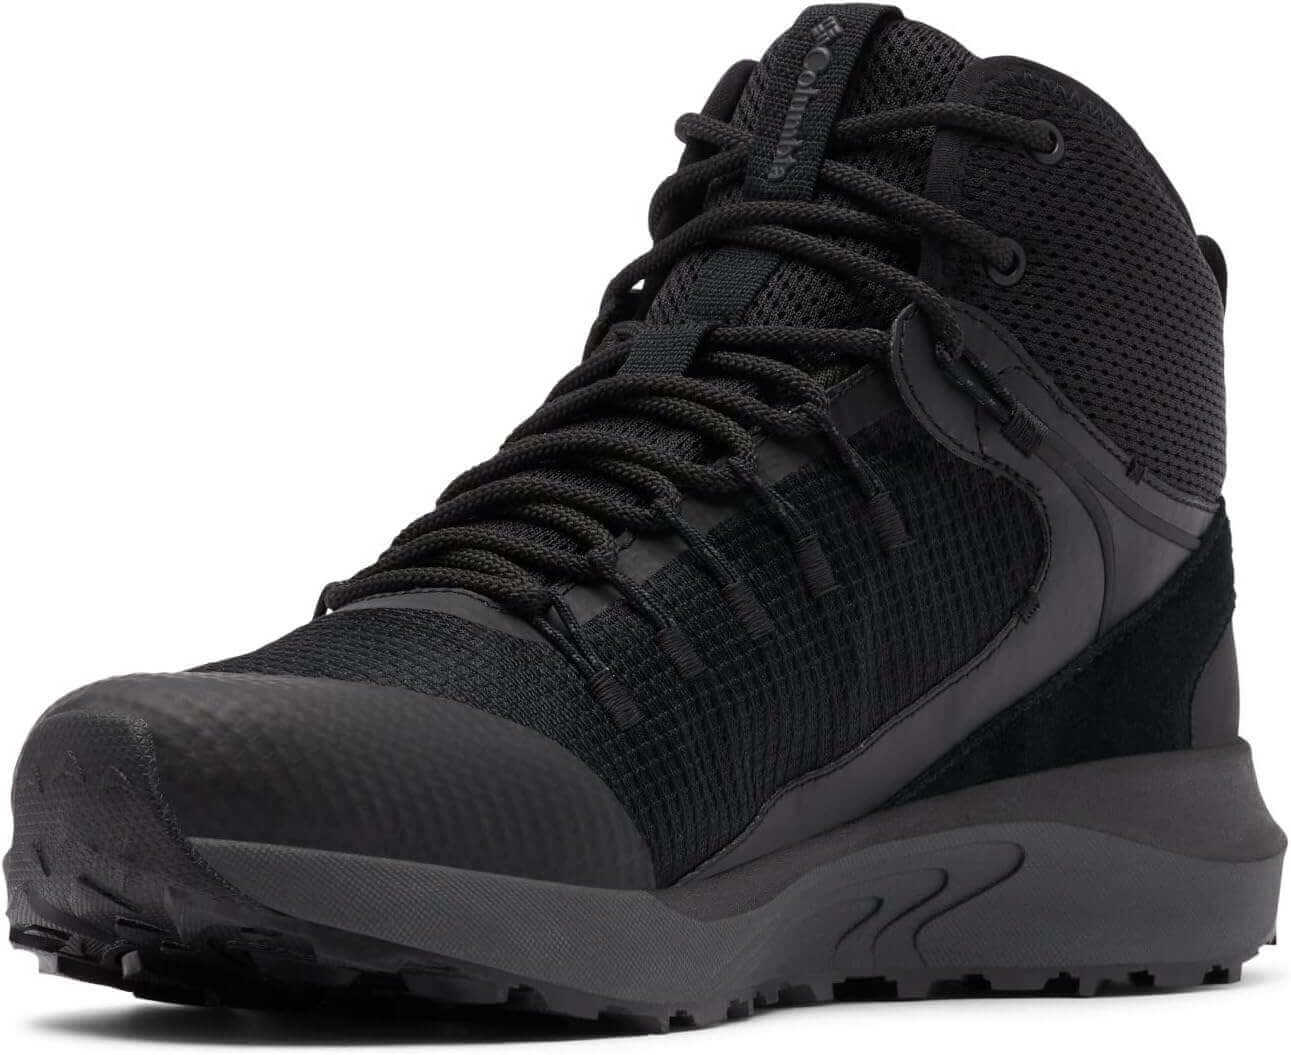 Shop The Latest >Columbia Men's Trailstorm Mid Waterproof Hiking Shoe > *Only $92.42*> From The Top Brand > *Columbial* > Shop Now and Get Free Shipping On Orders Over $45.00 >*Shop Earth Foot*